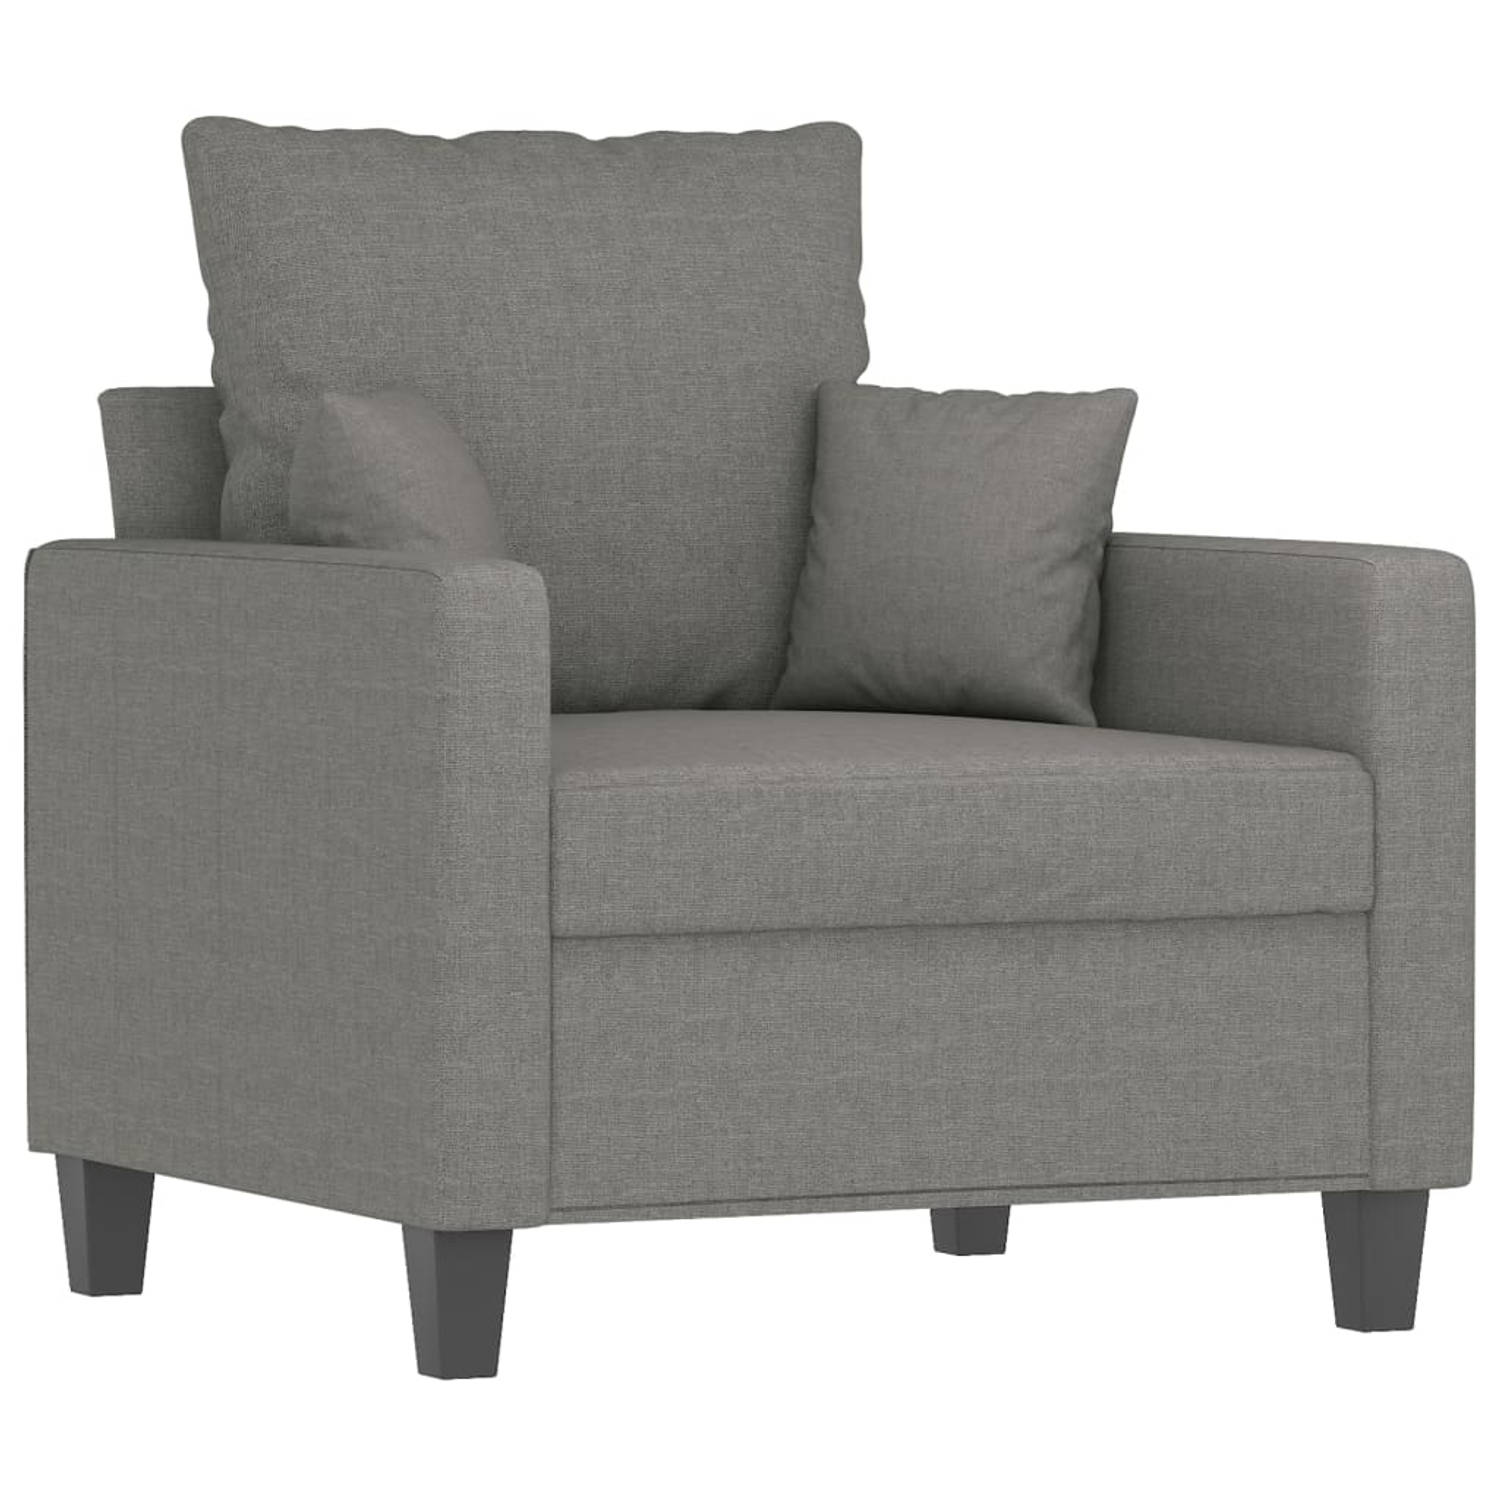 The Living Store Fauteuil 60 cm stof donkergrijs - Fauteuil